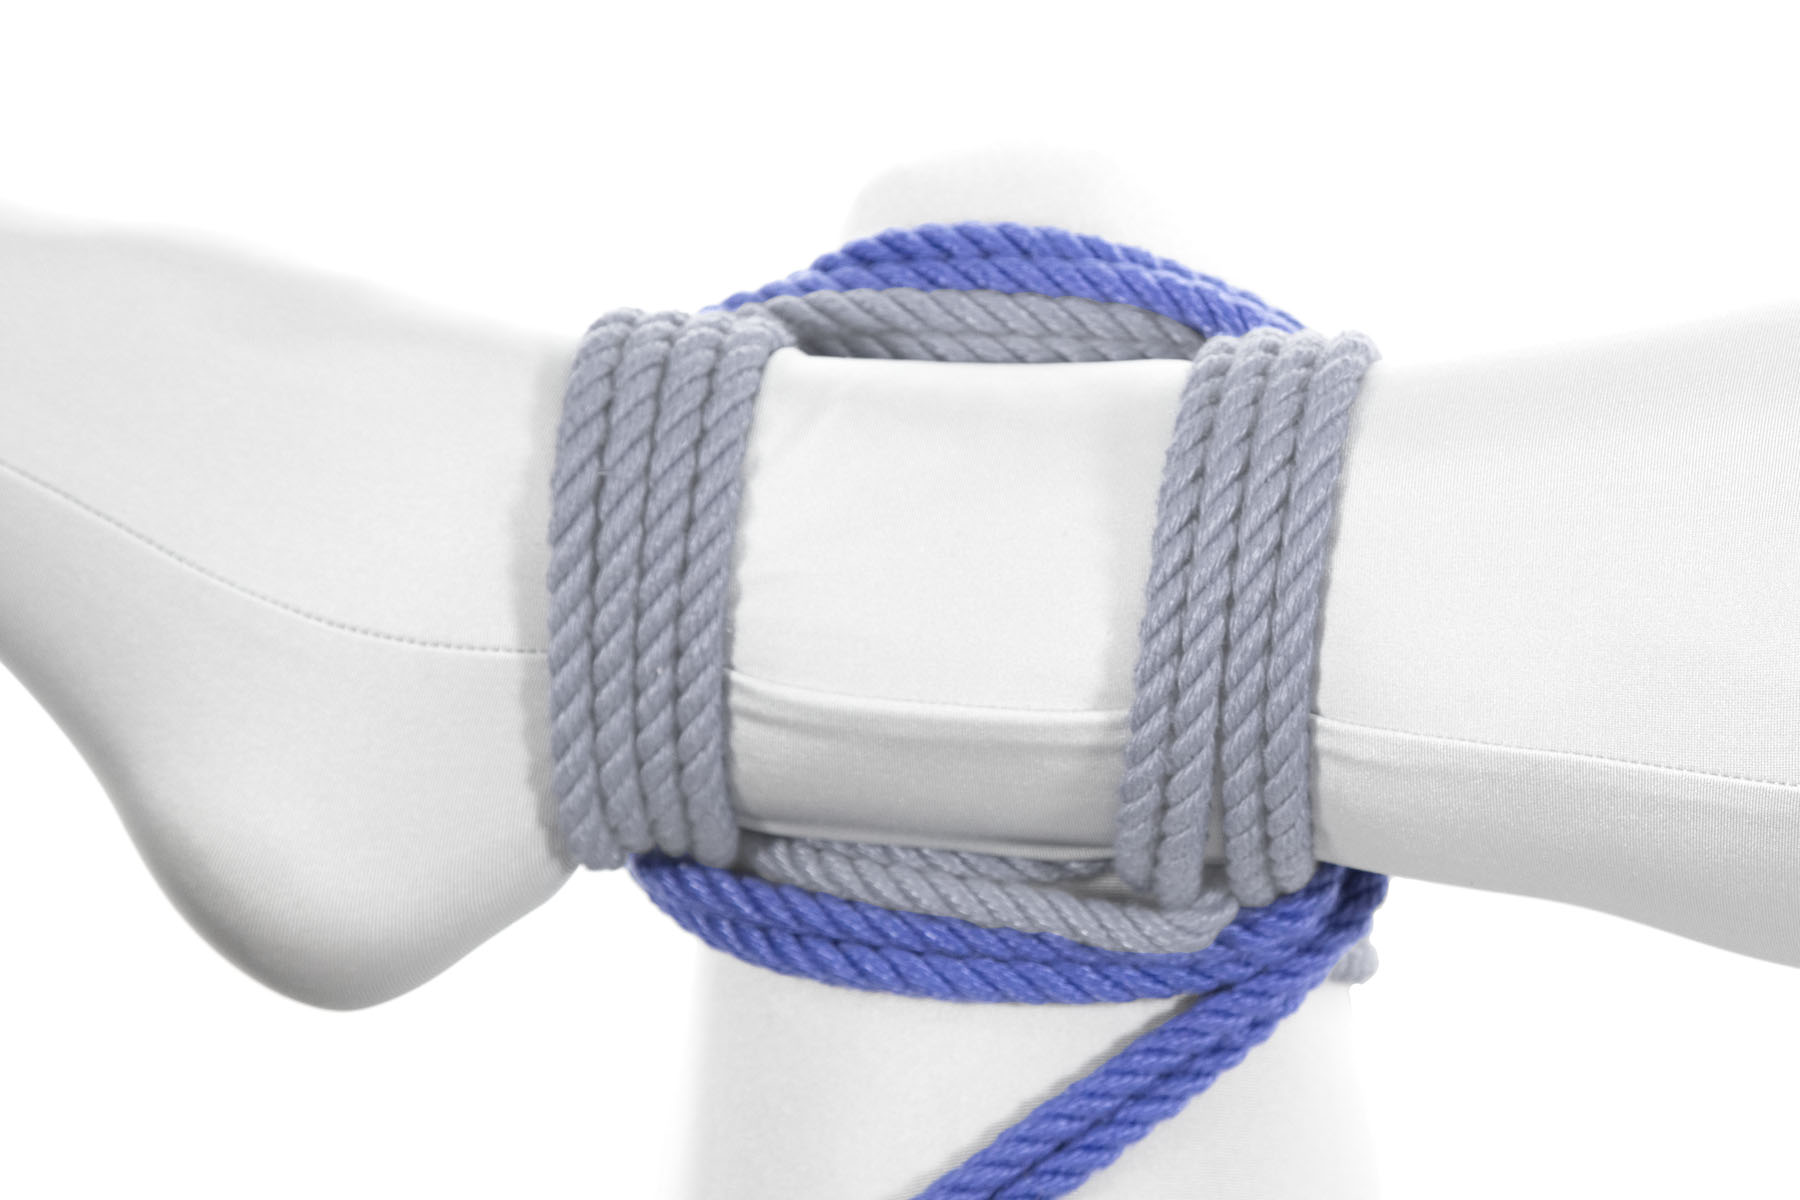 The rope now makes a second full square, crossing left over the left leg, moving away from the body under the right ankle, crossing right over the left leg just above the knee, and coming back toward the body under the right leg. It again ends up in the lower right of the frame.